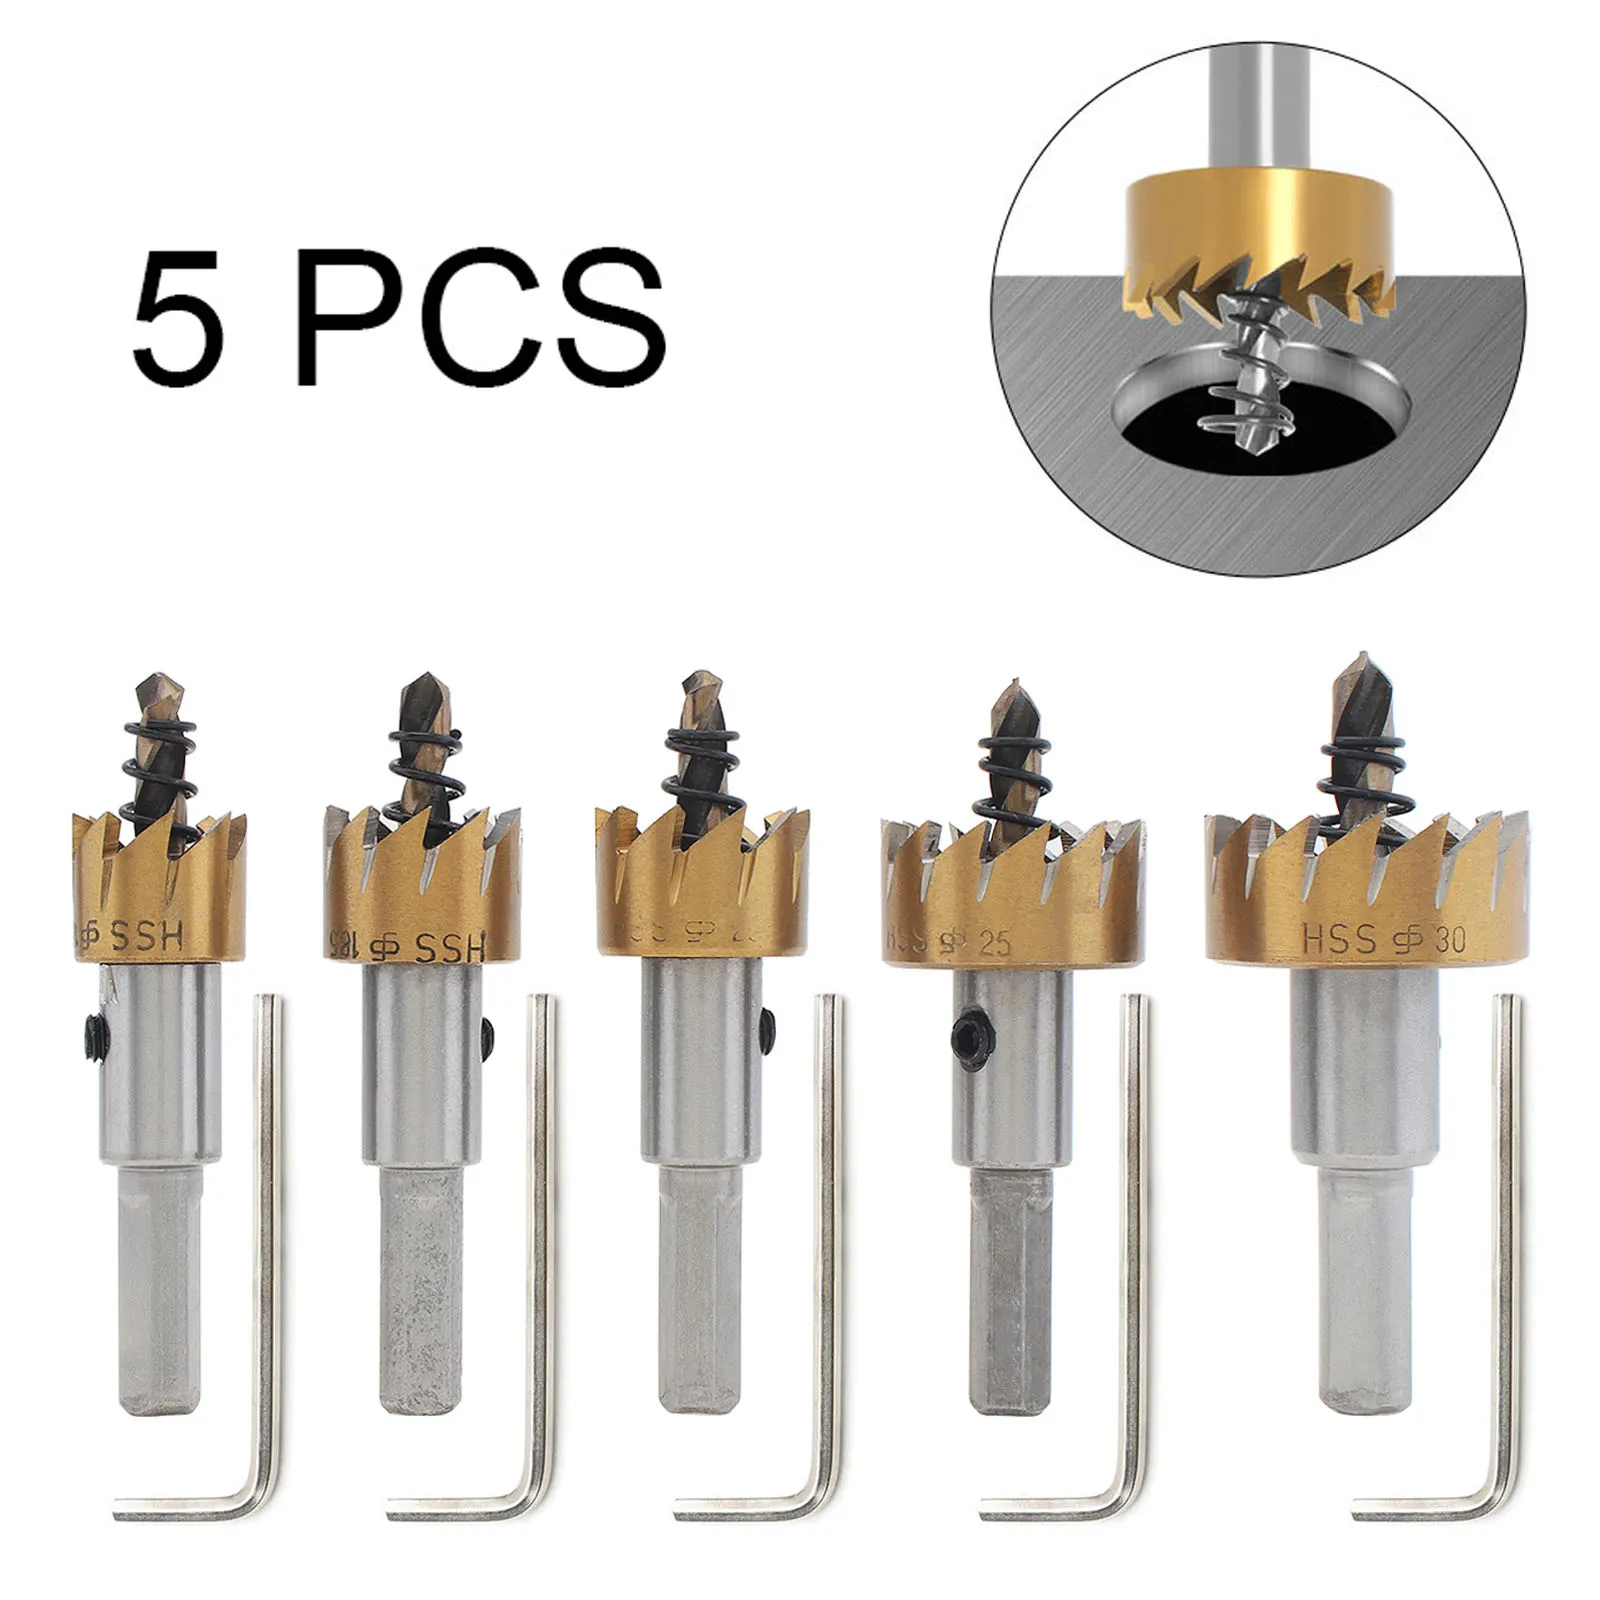 5pcs M35 Hole Saw Drill Bit Set HSS Titanium Plated M35 High Speed Steel Hole Opener Kit Cutting Metal Plastic Wood Iron Plate durable m35 16mm carbide tip hss drill bit hole saw stainless steel metal alloy drilling hole opener tool